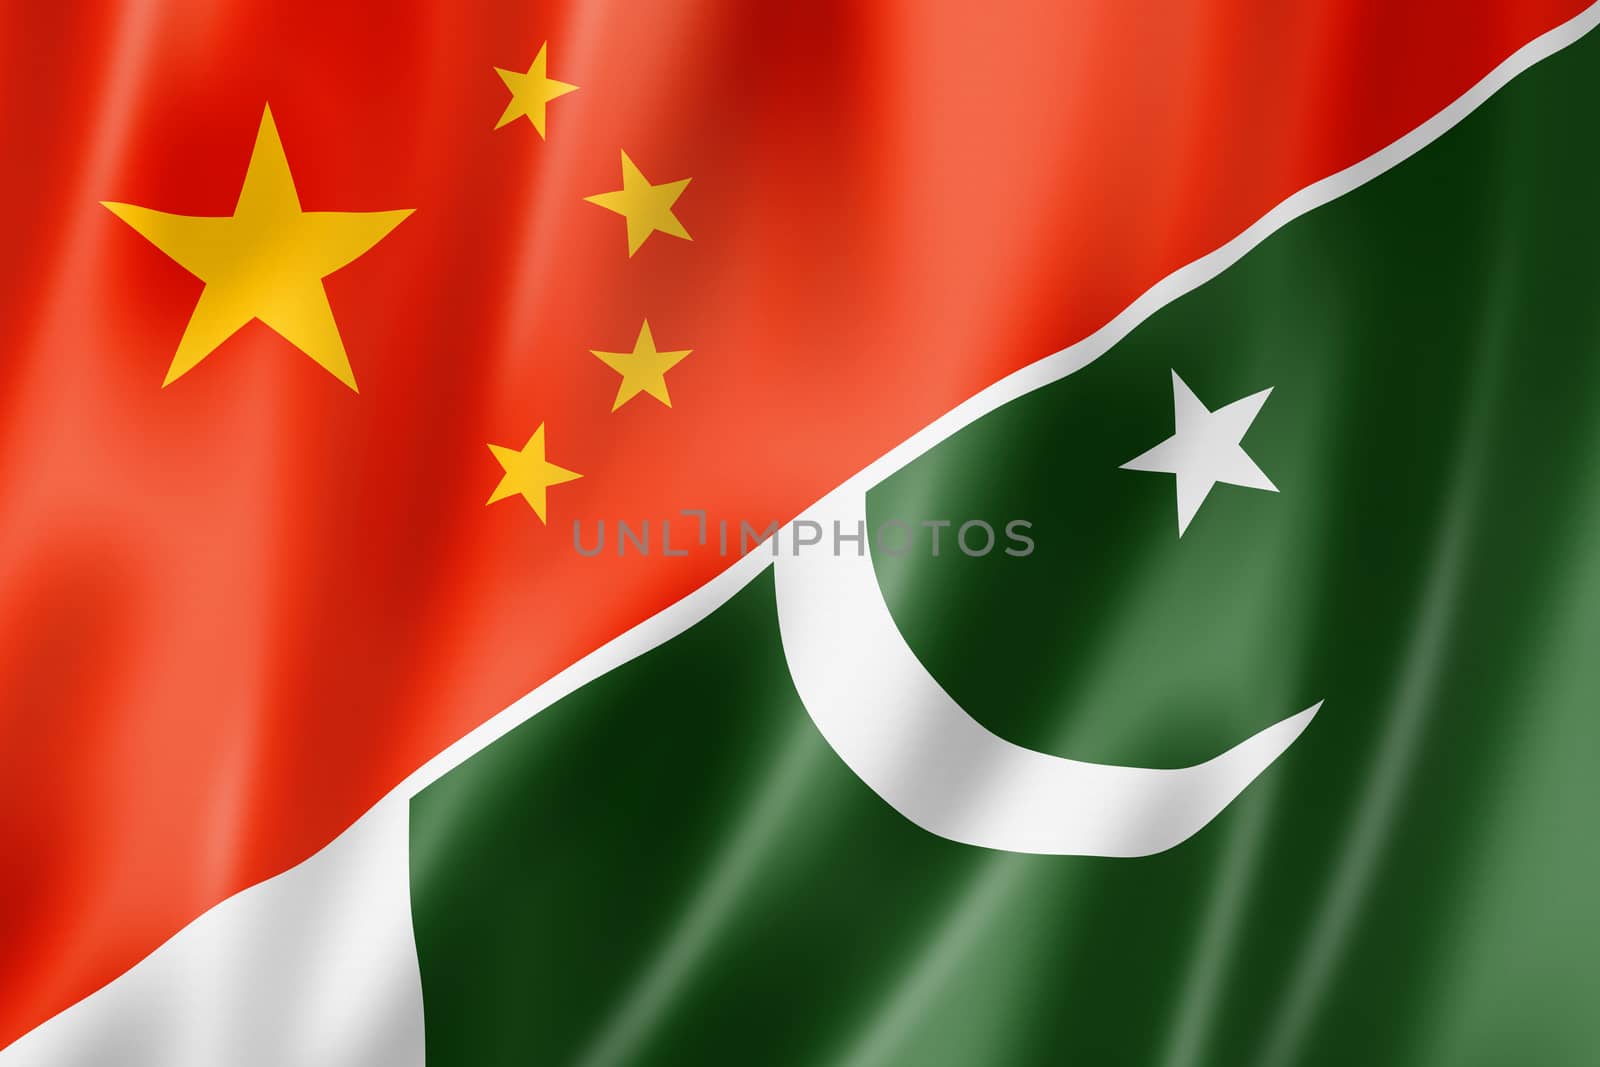 China and Pakistan flag by daboost